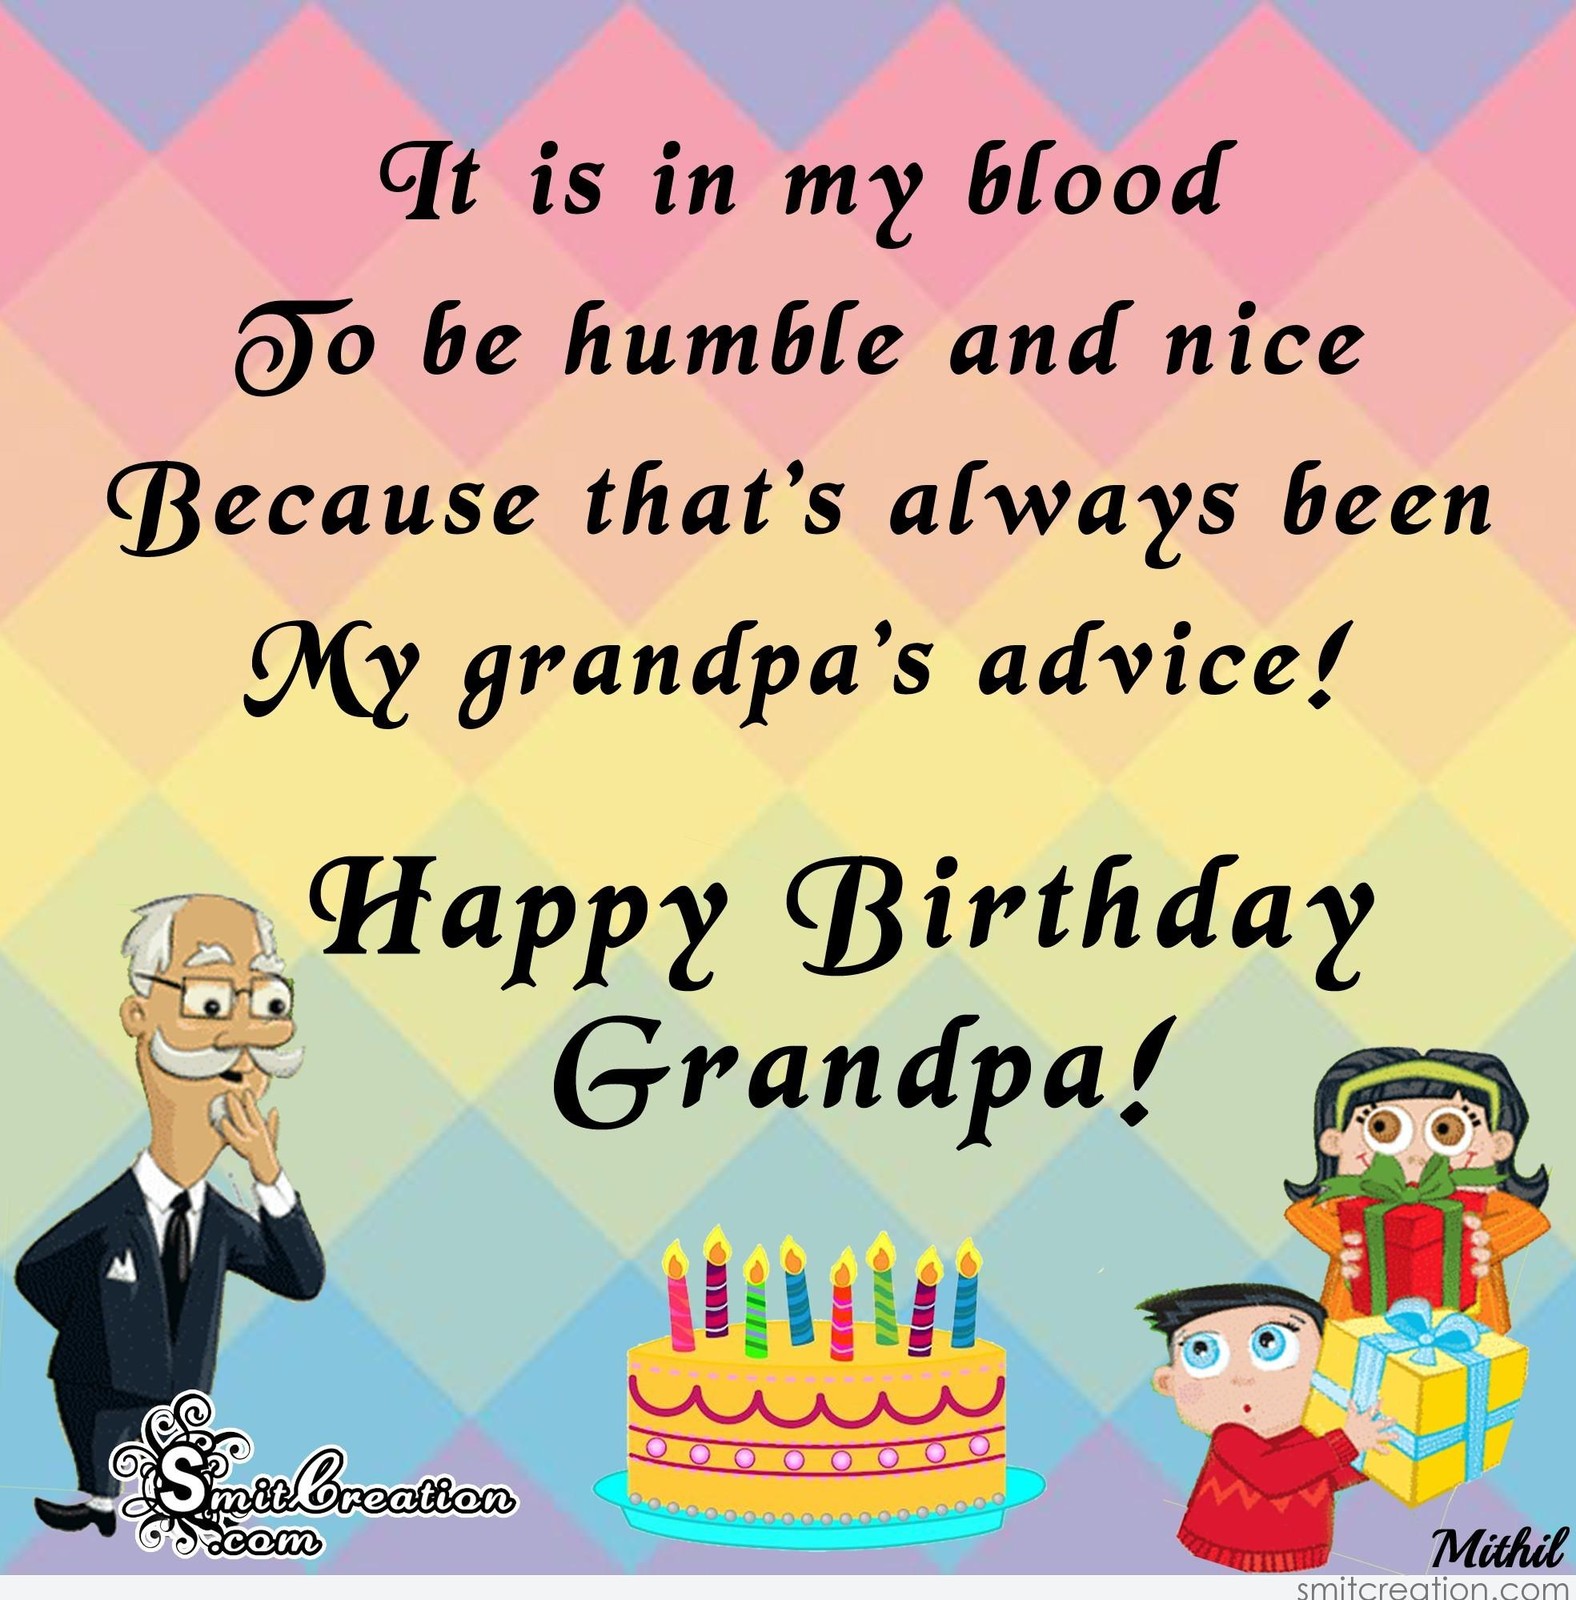 Download Happy Birthday Images For Grandfather Free Beautiful Bday Cards And Pictures Bday Card Com